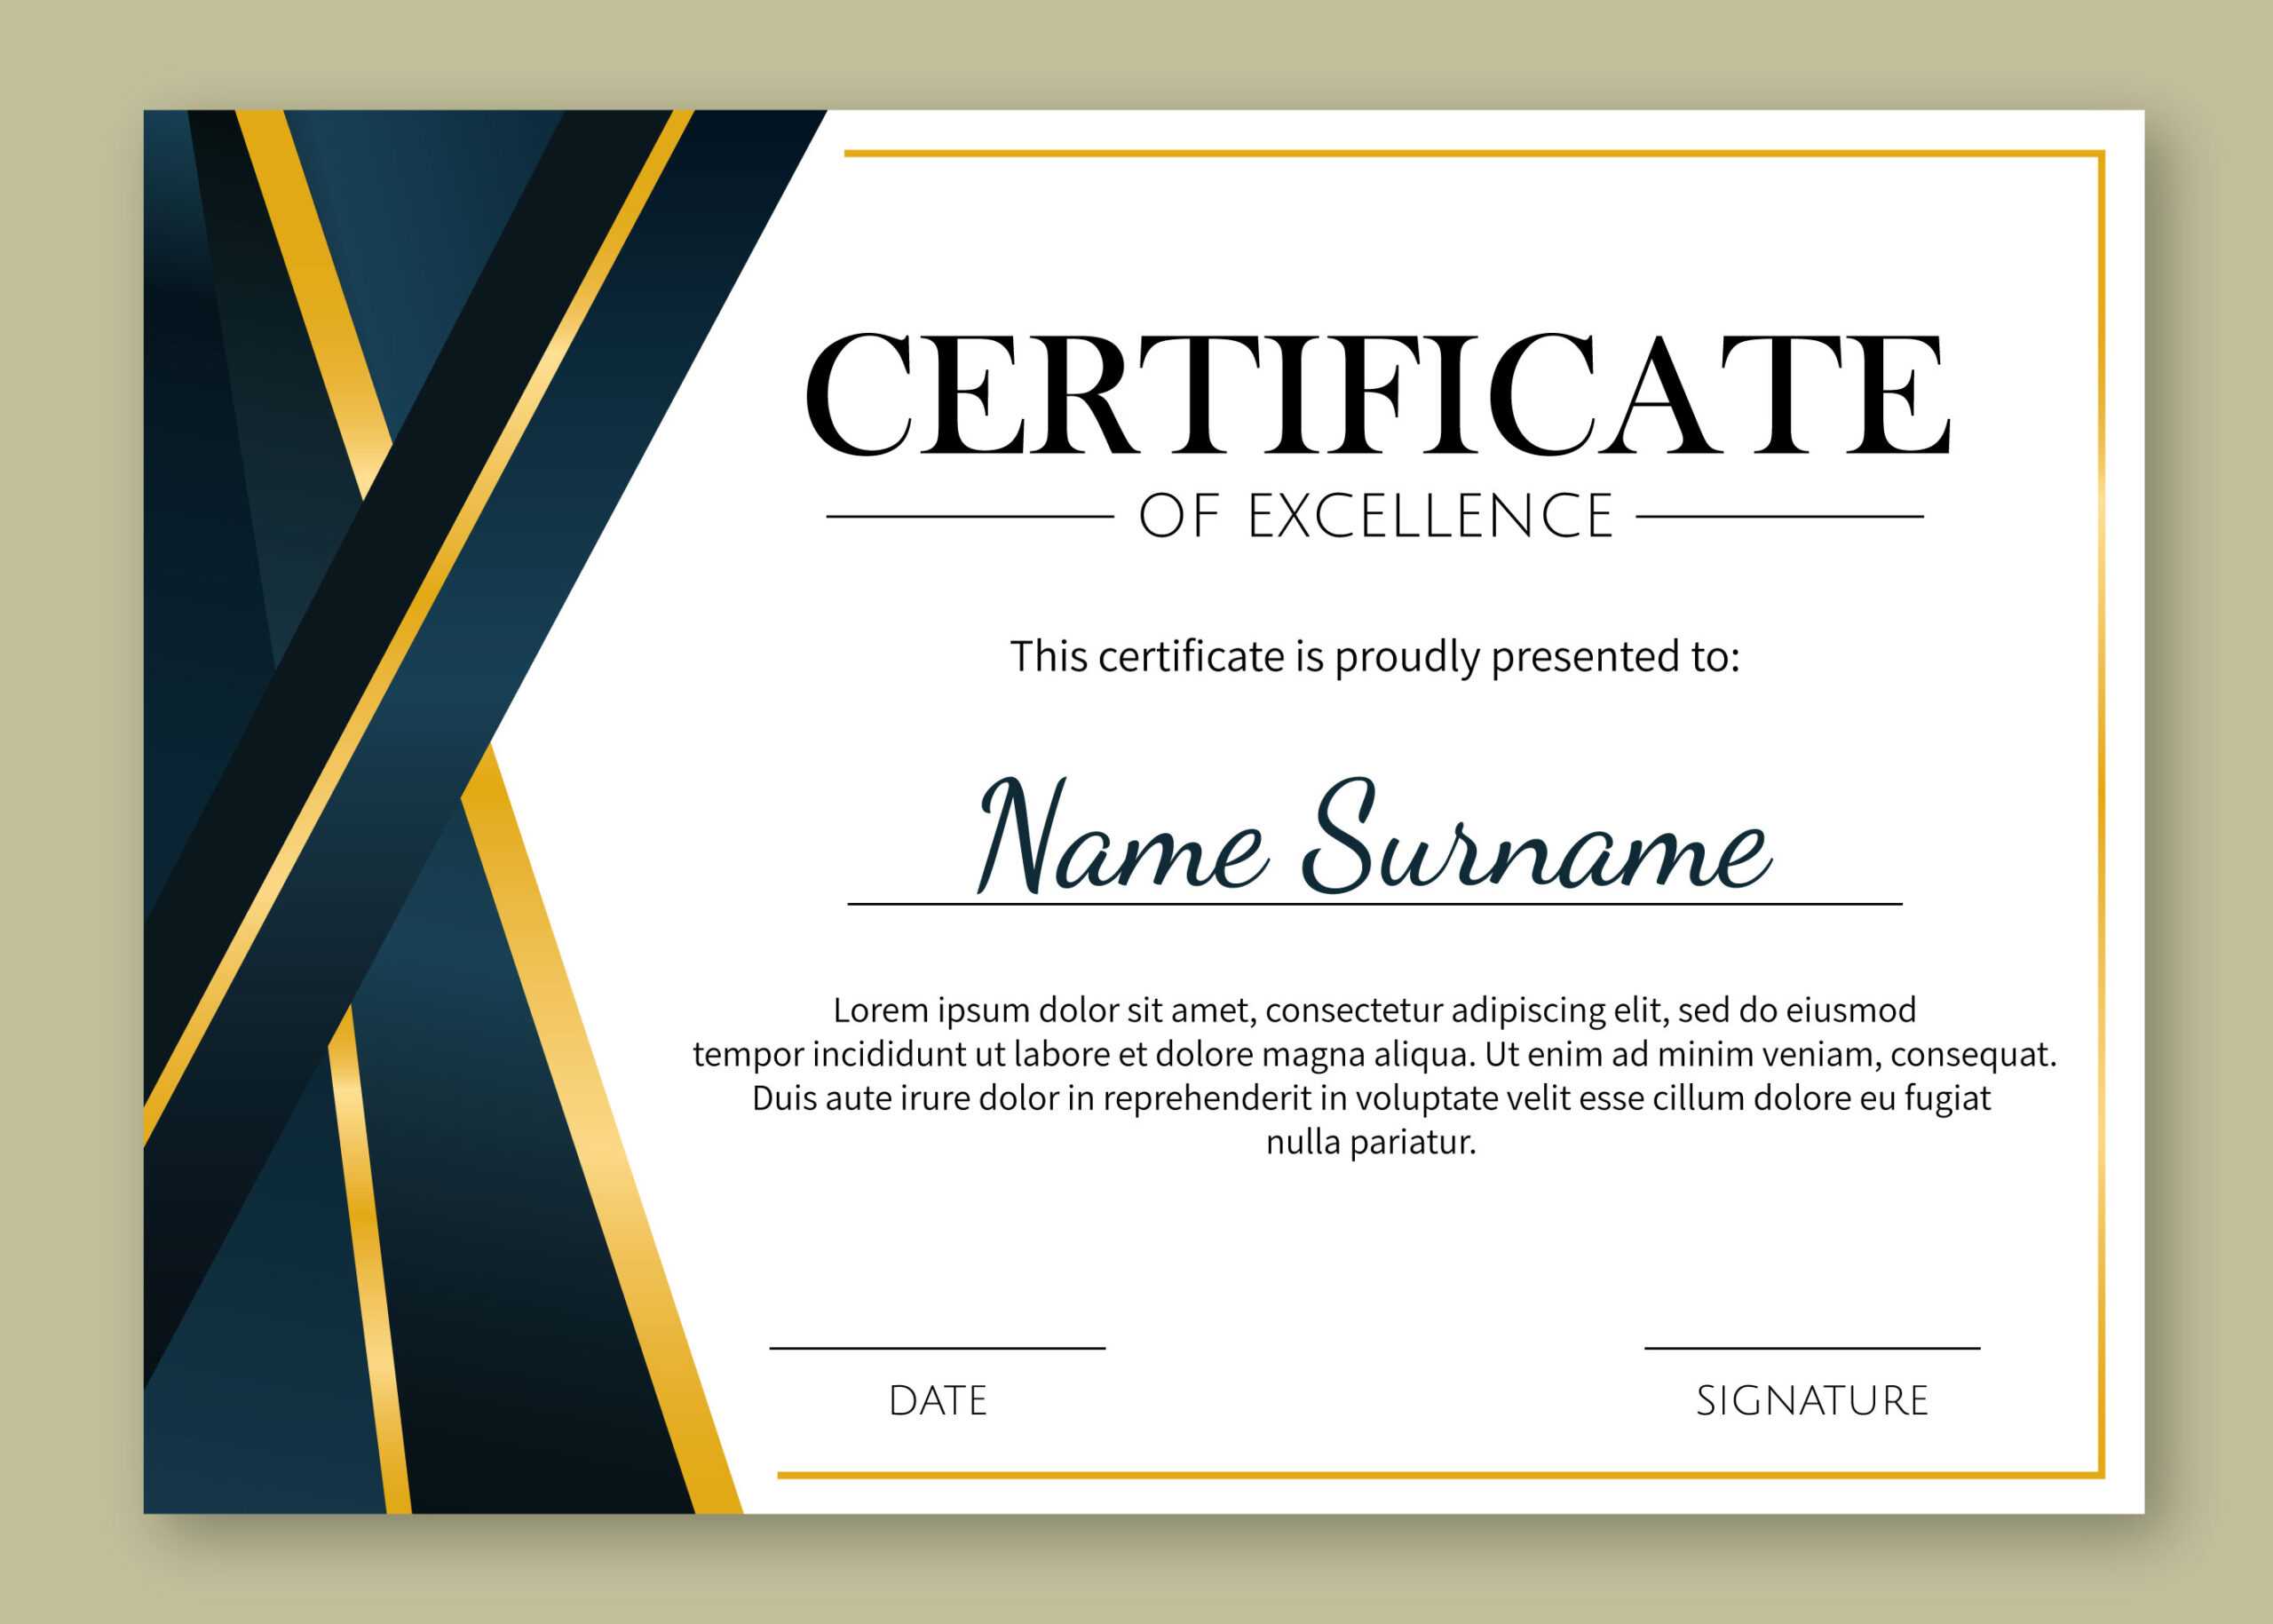 Certificate Of Excellence Template Free Download In Certificate Of Excellence Template Free Download